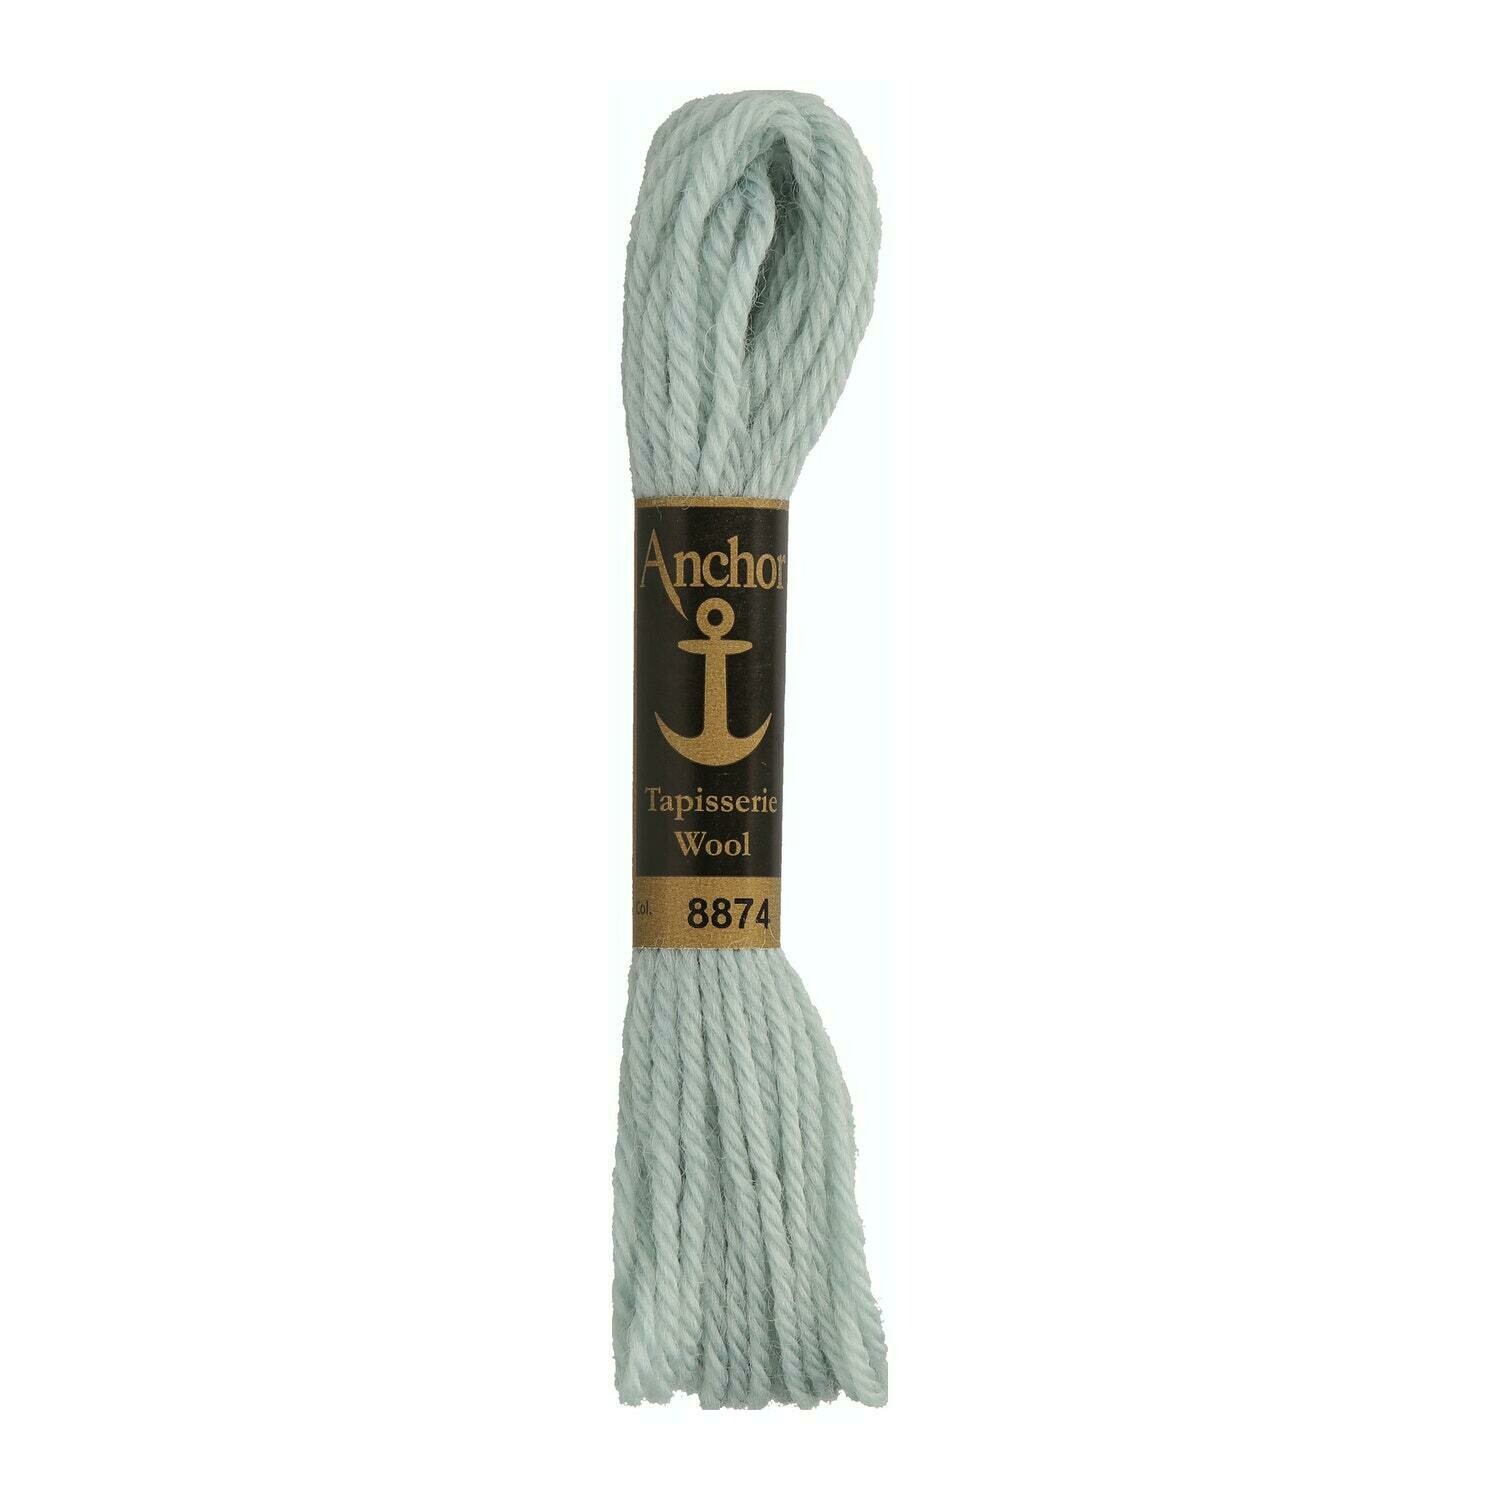 Anchor Tapisserie Wool #08918